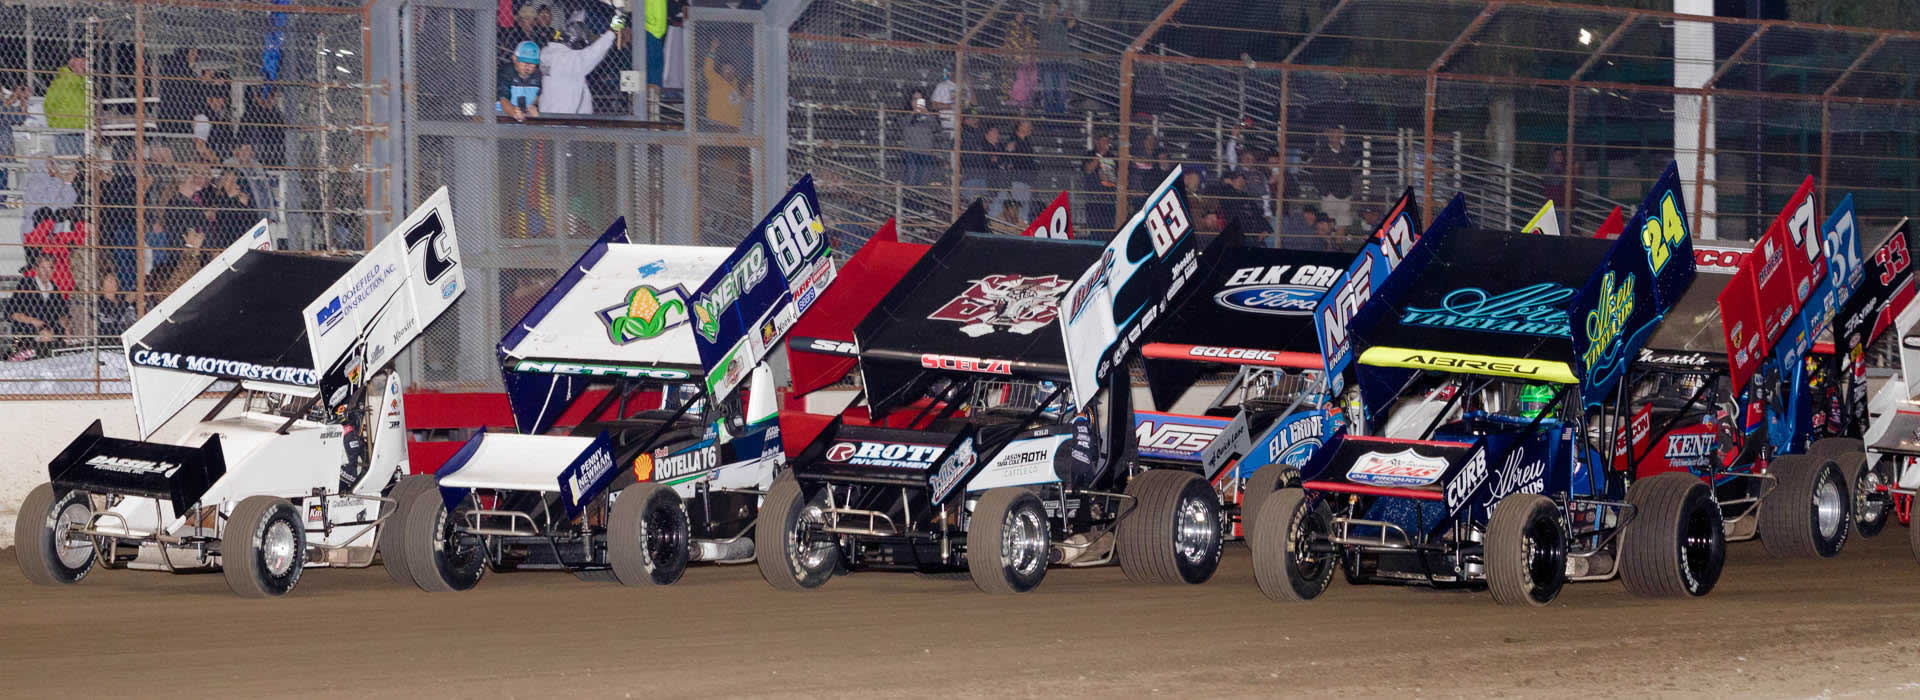 Kings of Thunder Winged 360 Sprint Cars